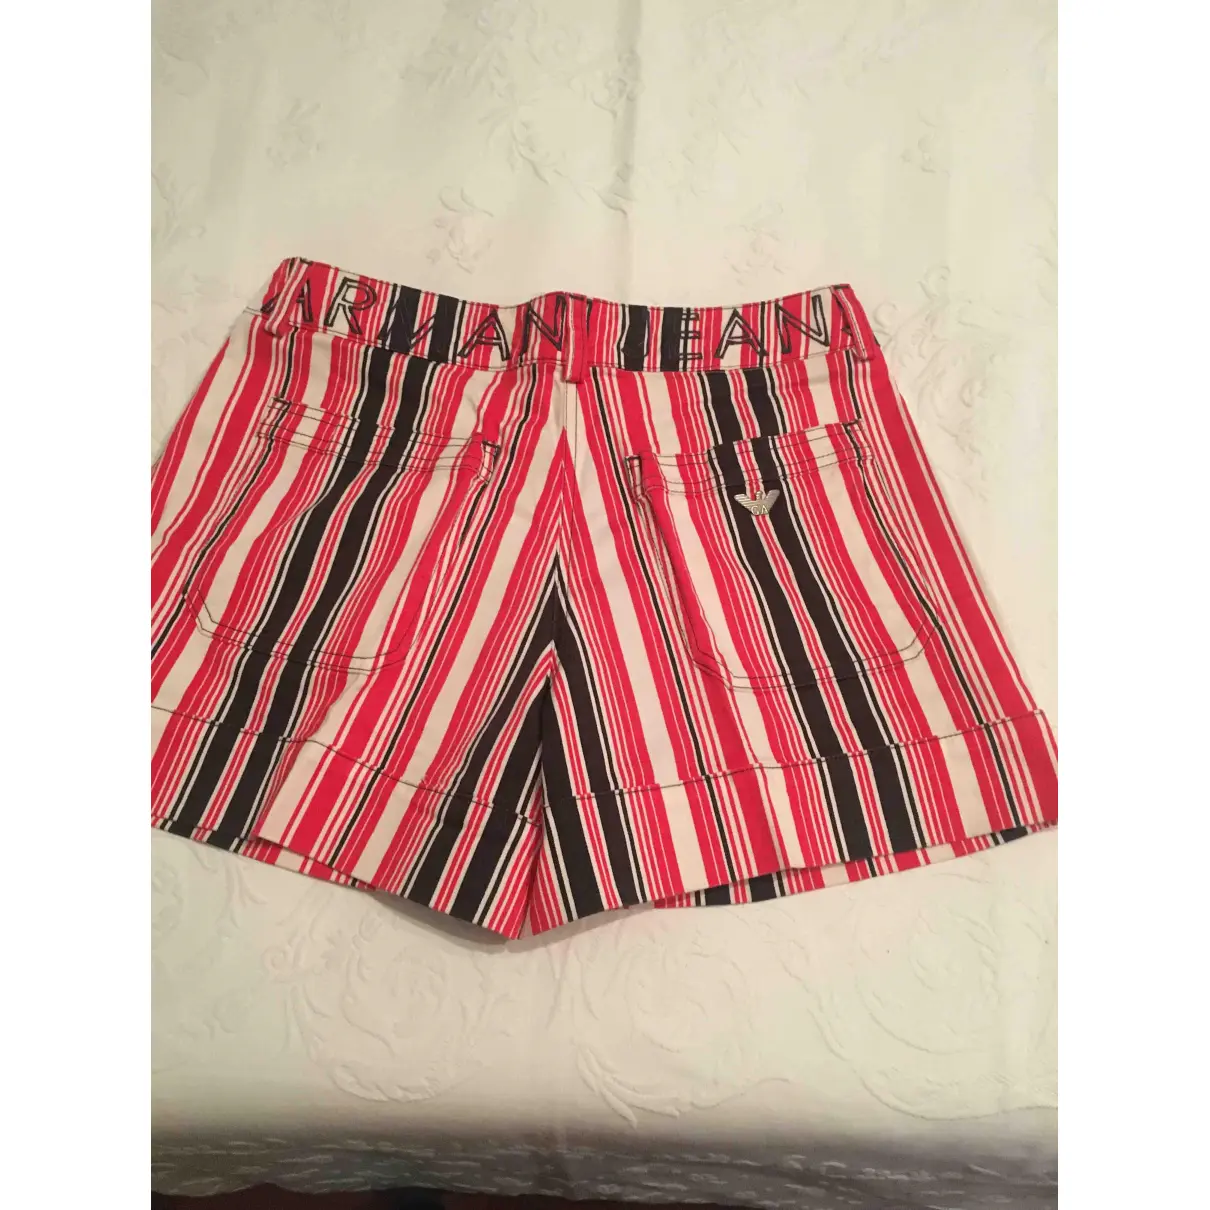 Buy Armani Jeans Shorts online